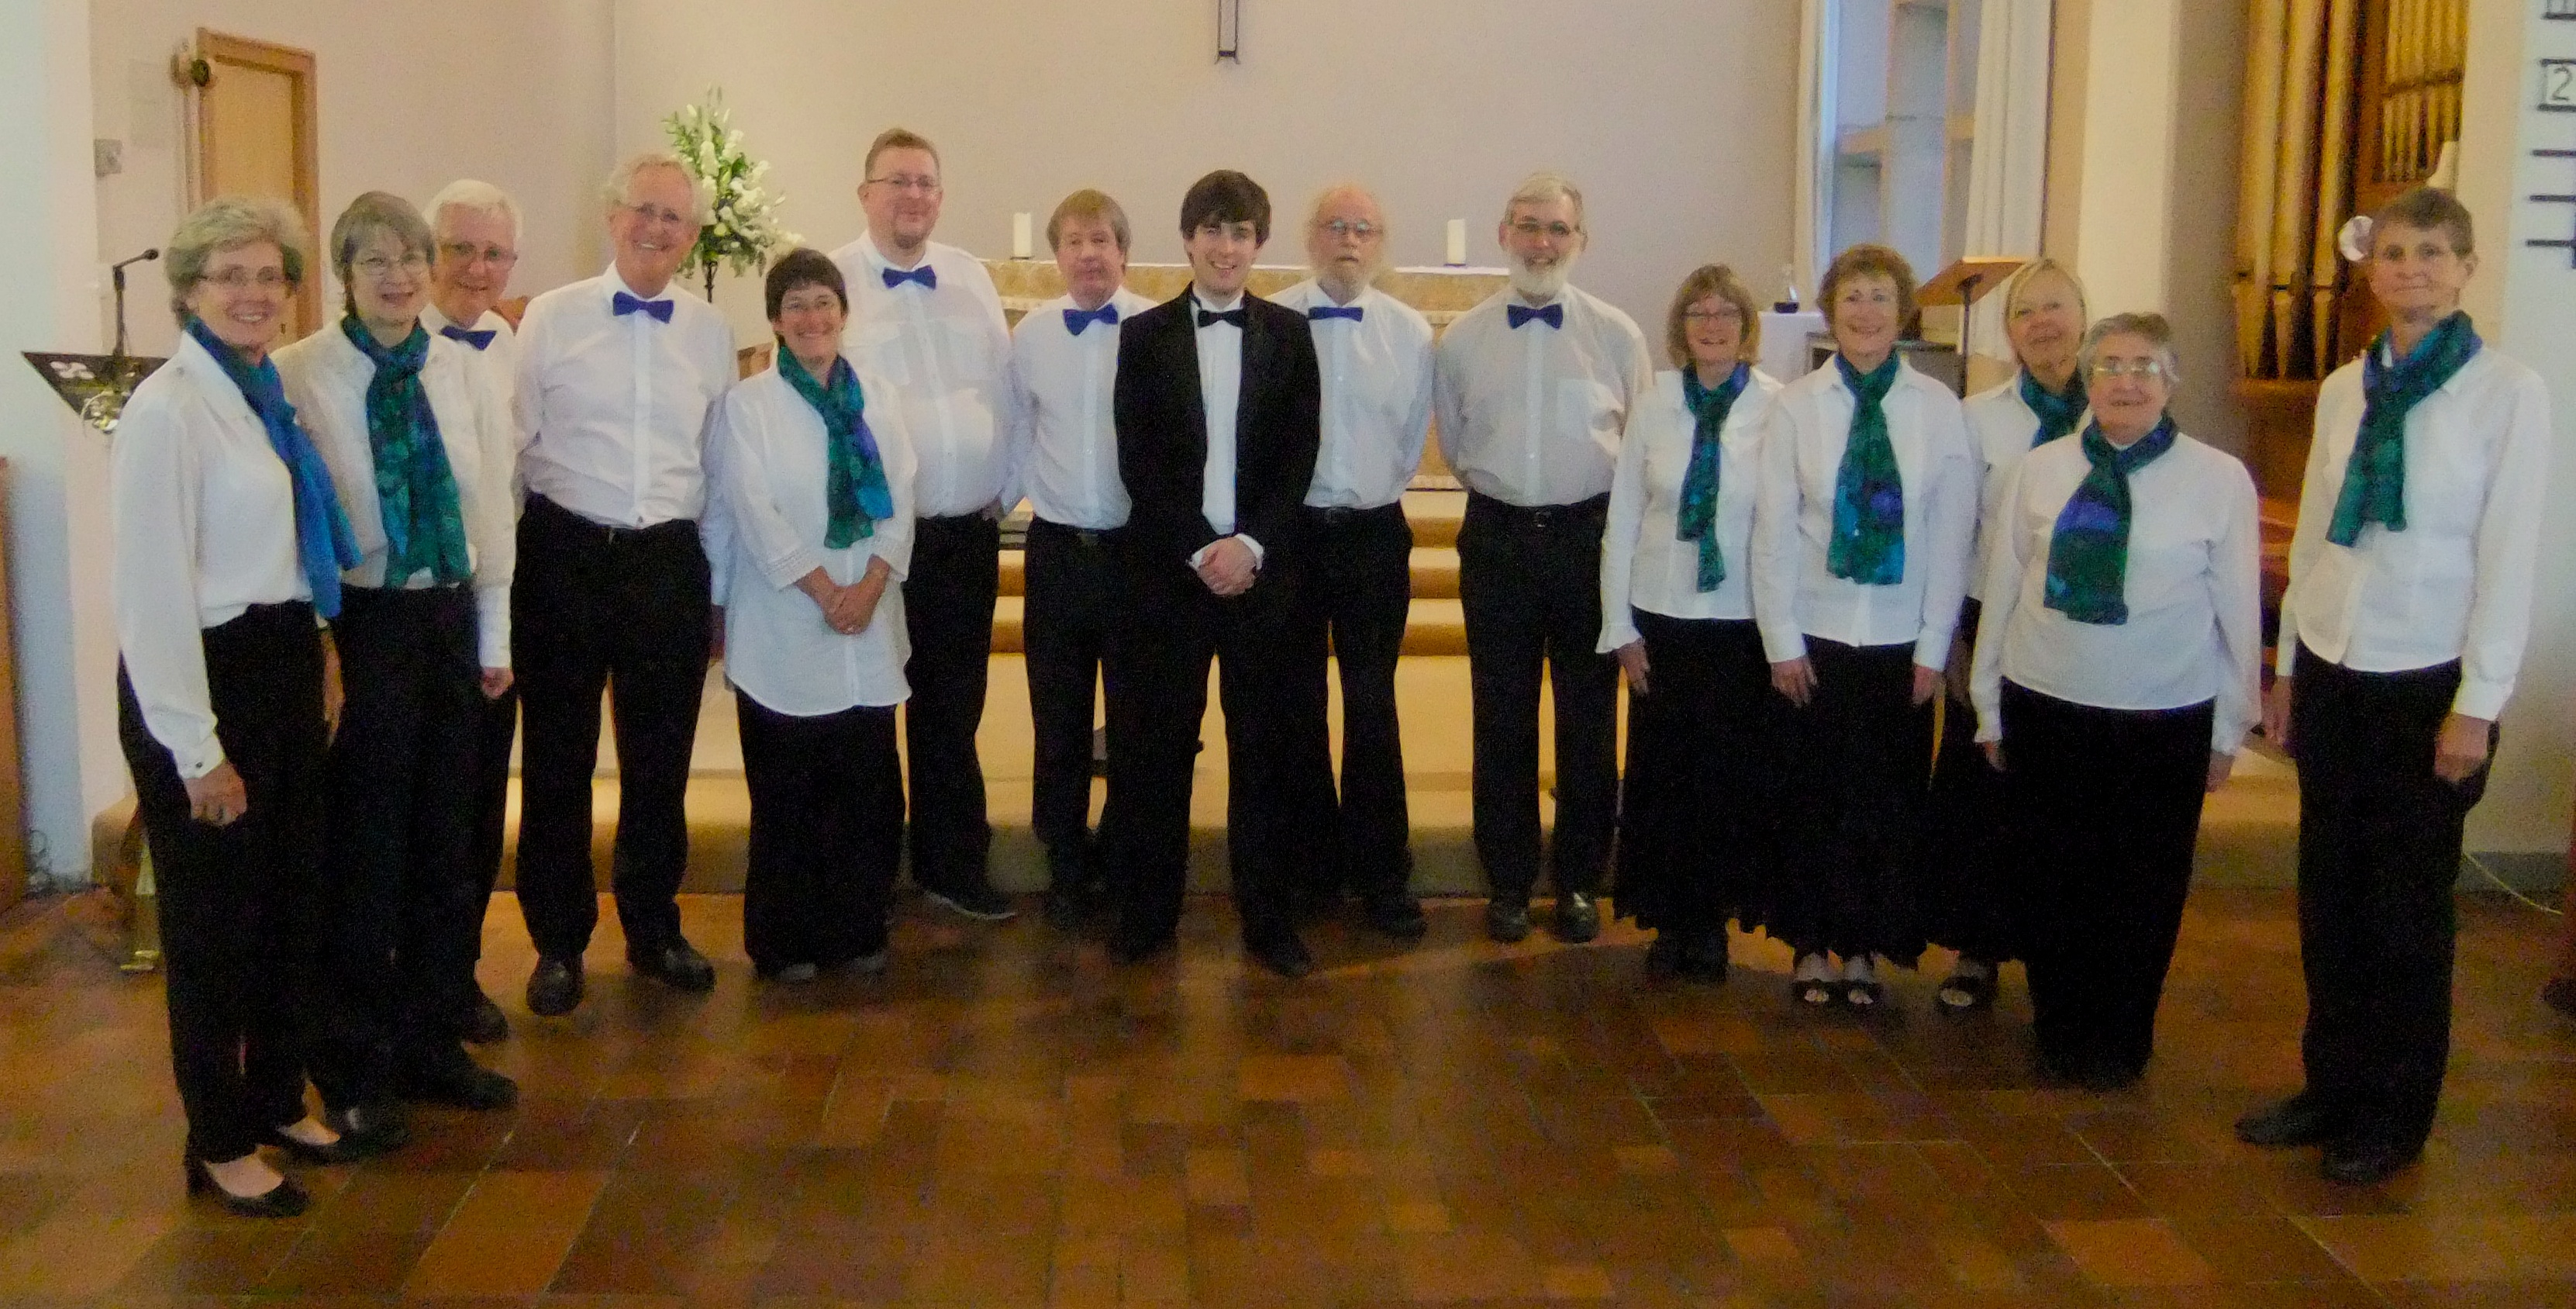 The Crown Singers with Paul Burke after their June 2014 concert.